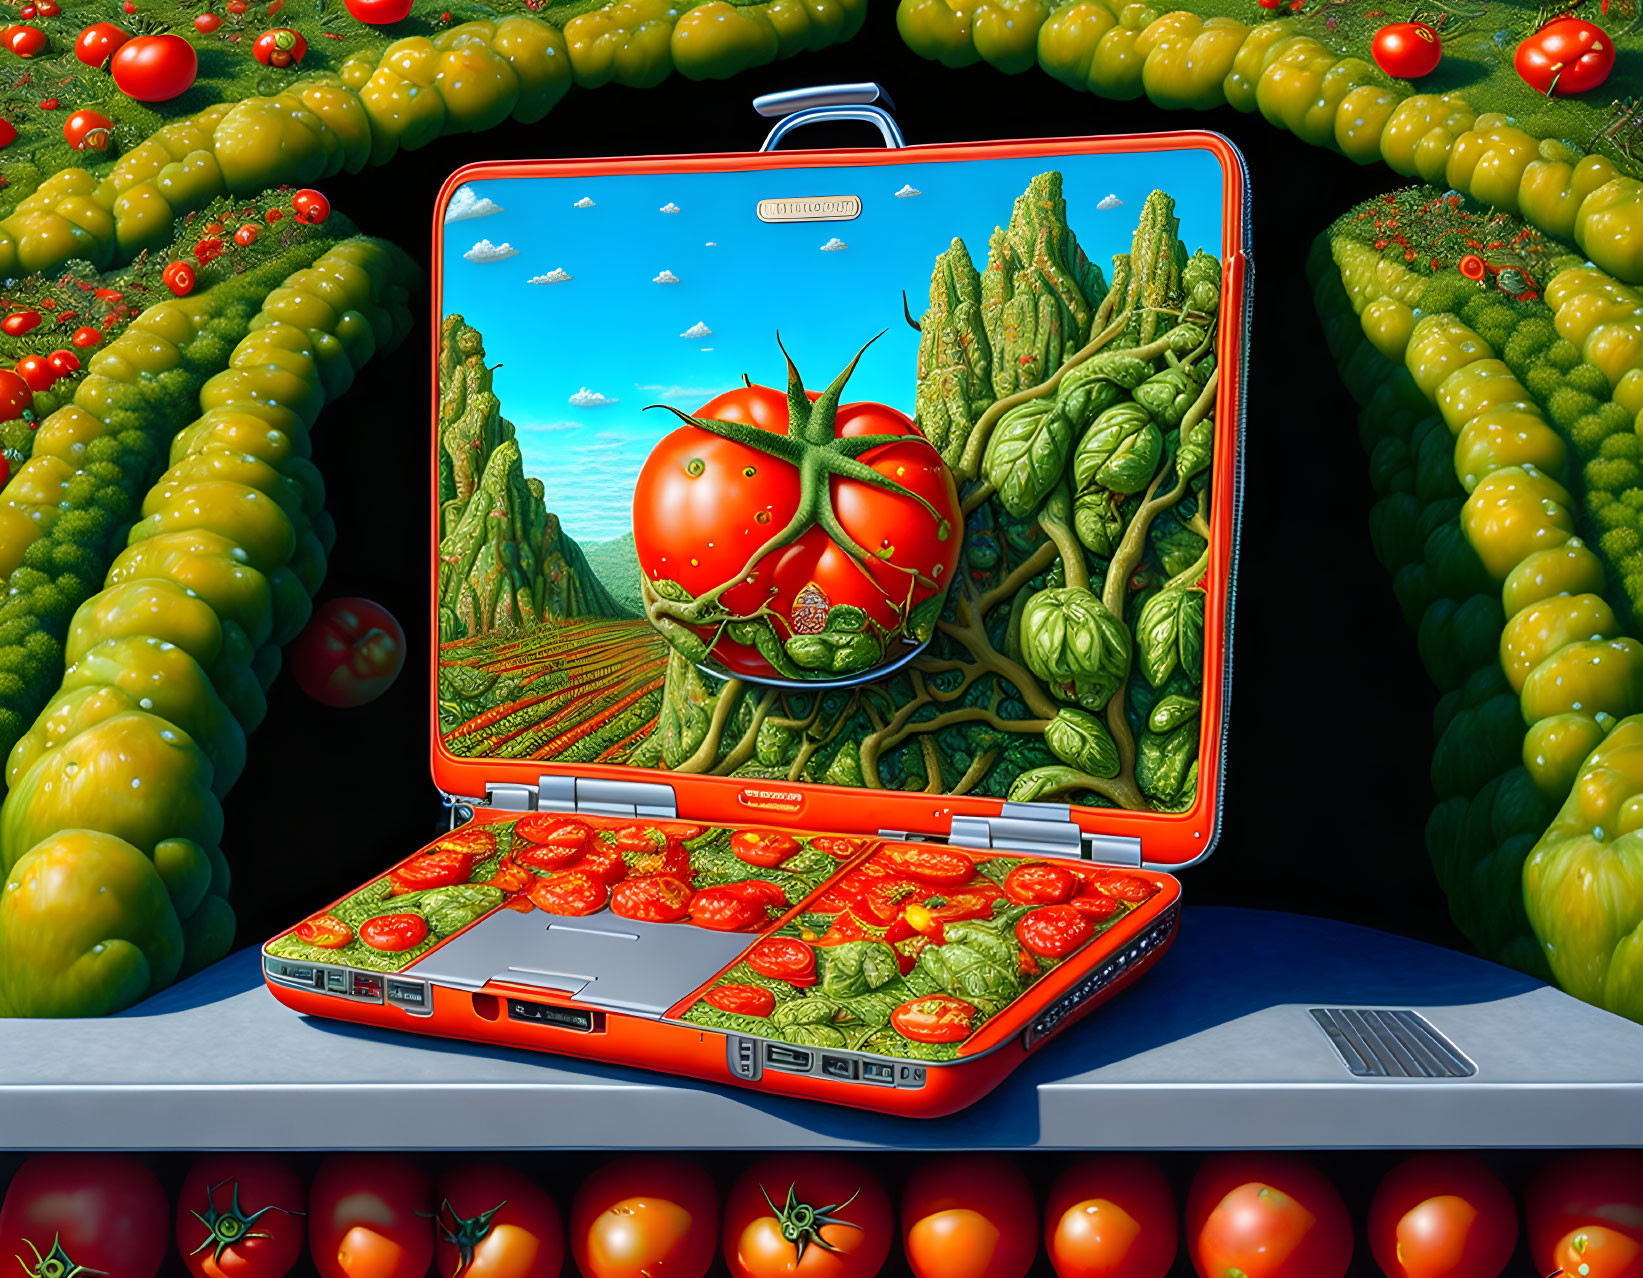 Surreal illustration of laptop with tomato theme in green fields